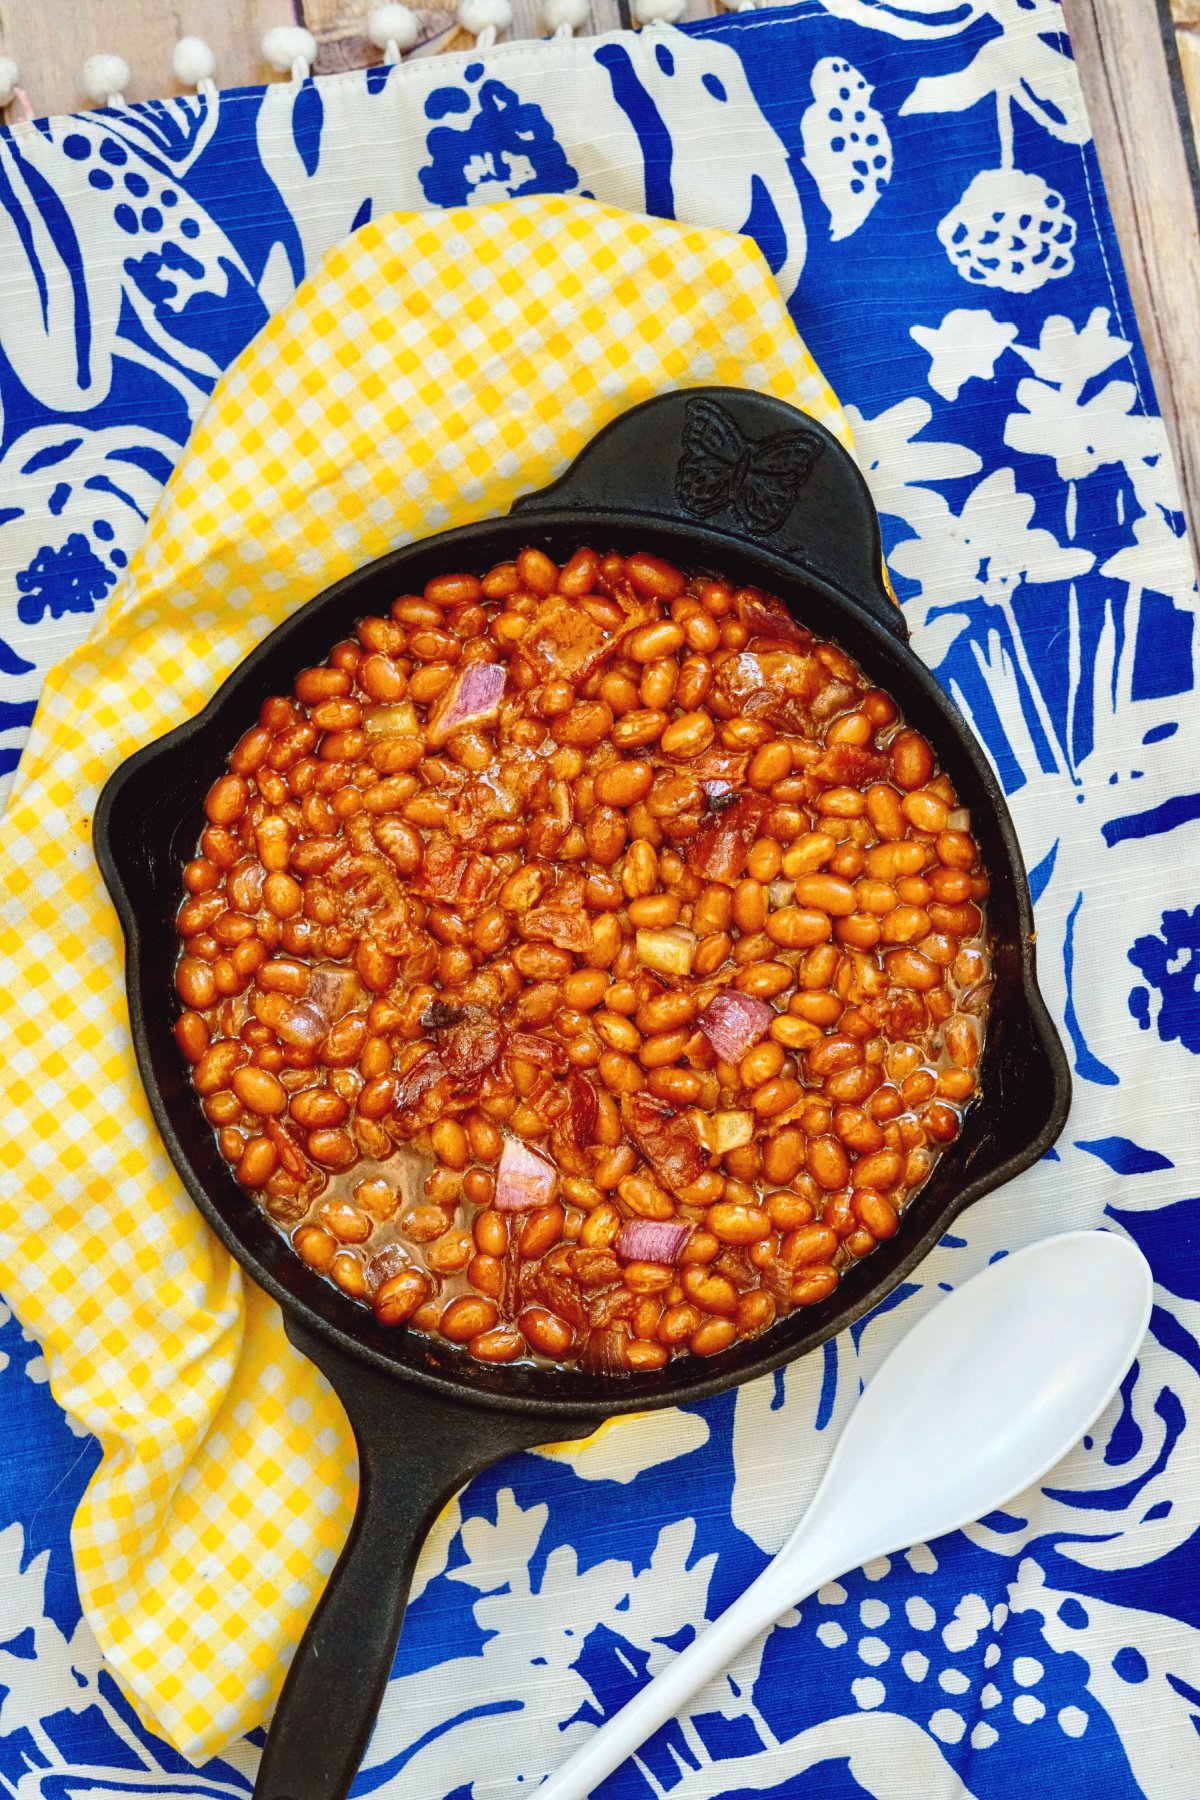 Coca cola baked beans in a cast iron skillet